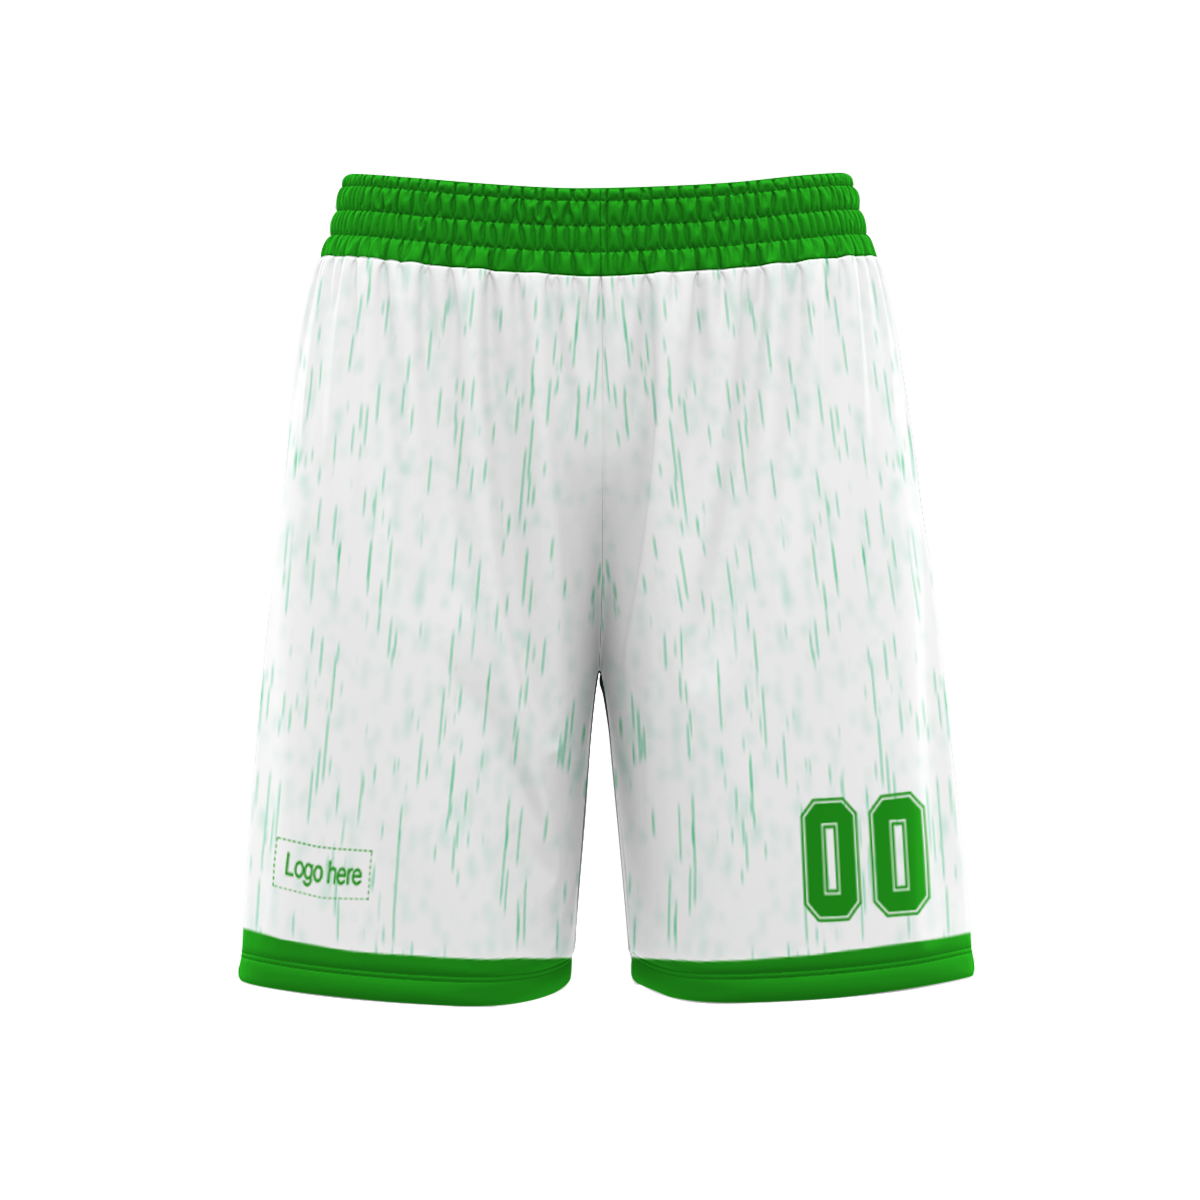 wholesale-customized-team-logo-blank-polyester-breathable-mesh-sublimation-team-competition-basketball-uniform-set-at-cj-pod-7